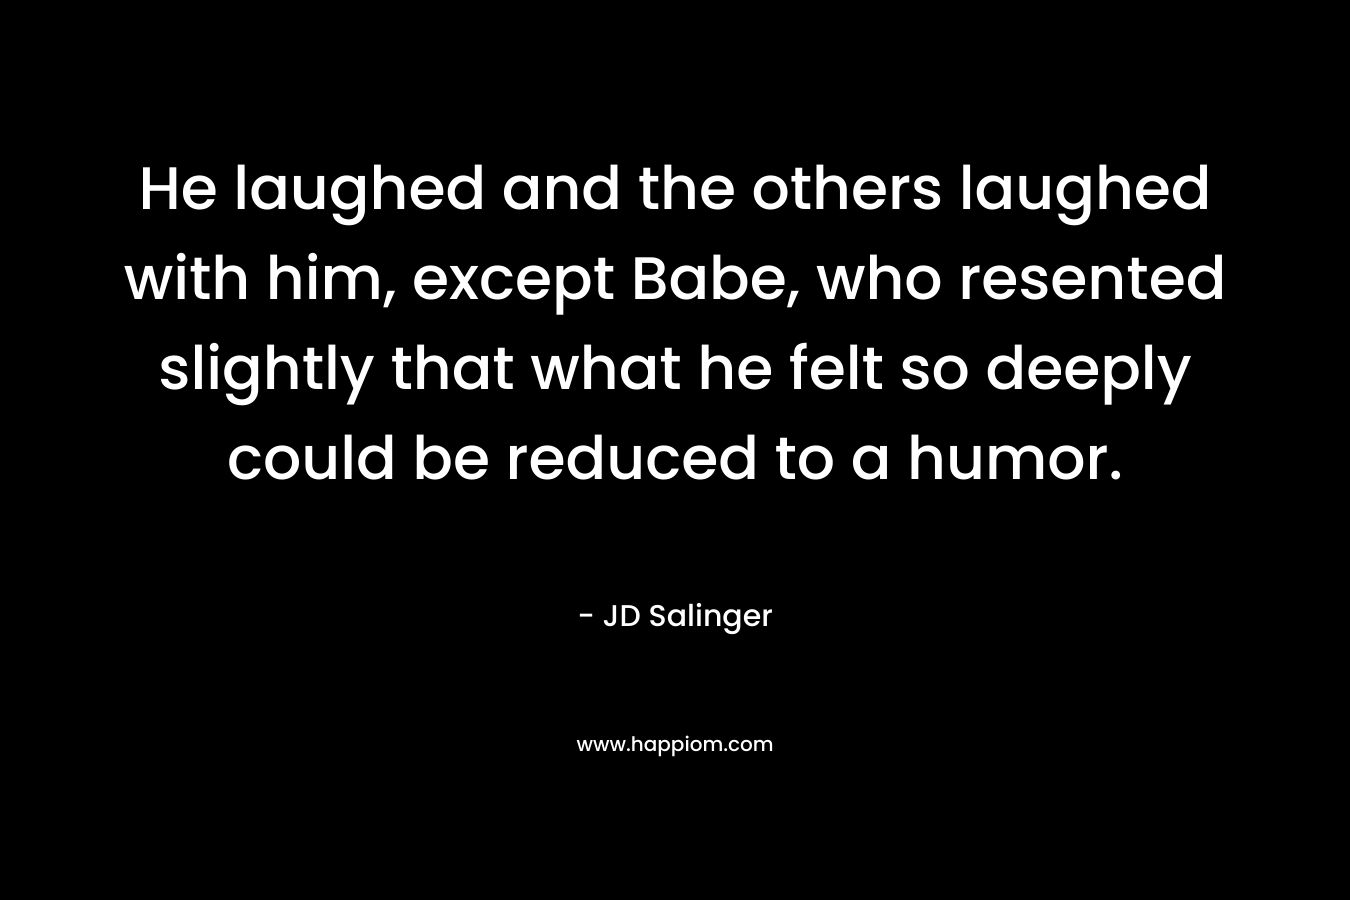 He laughed and the others laughed with him, except Babe, who resented slightly that what he felt so deeply could be reduced to a humor.